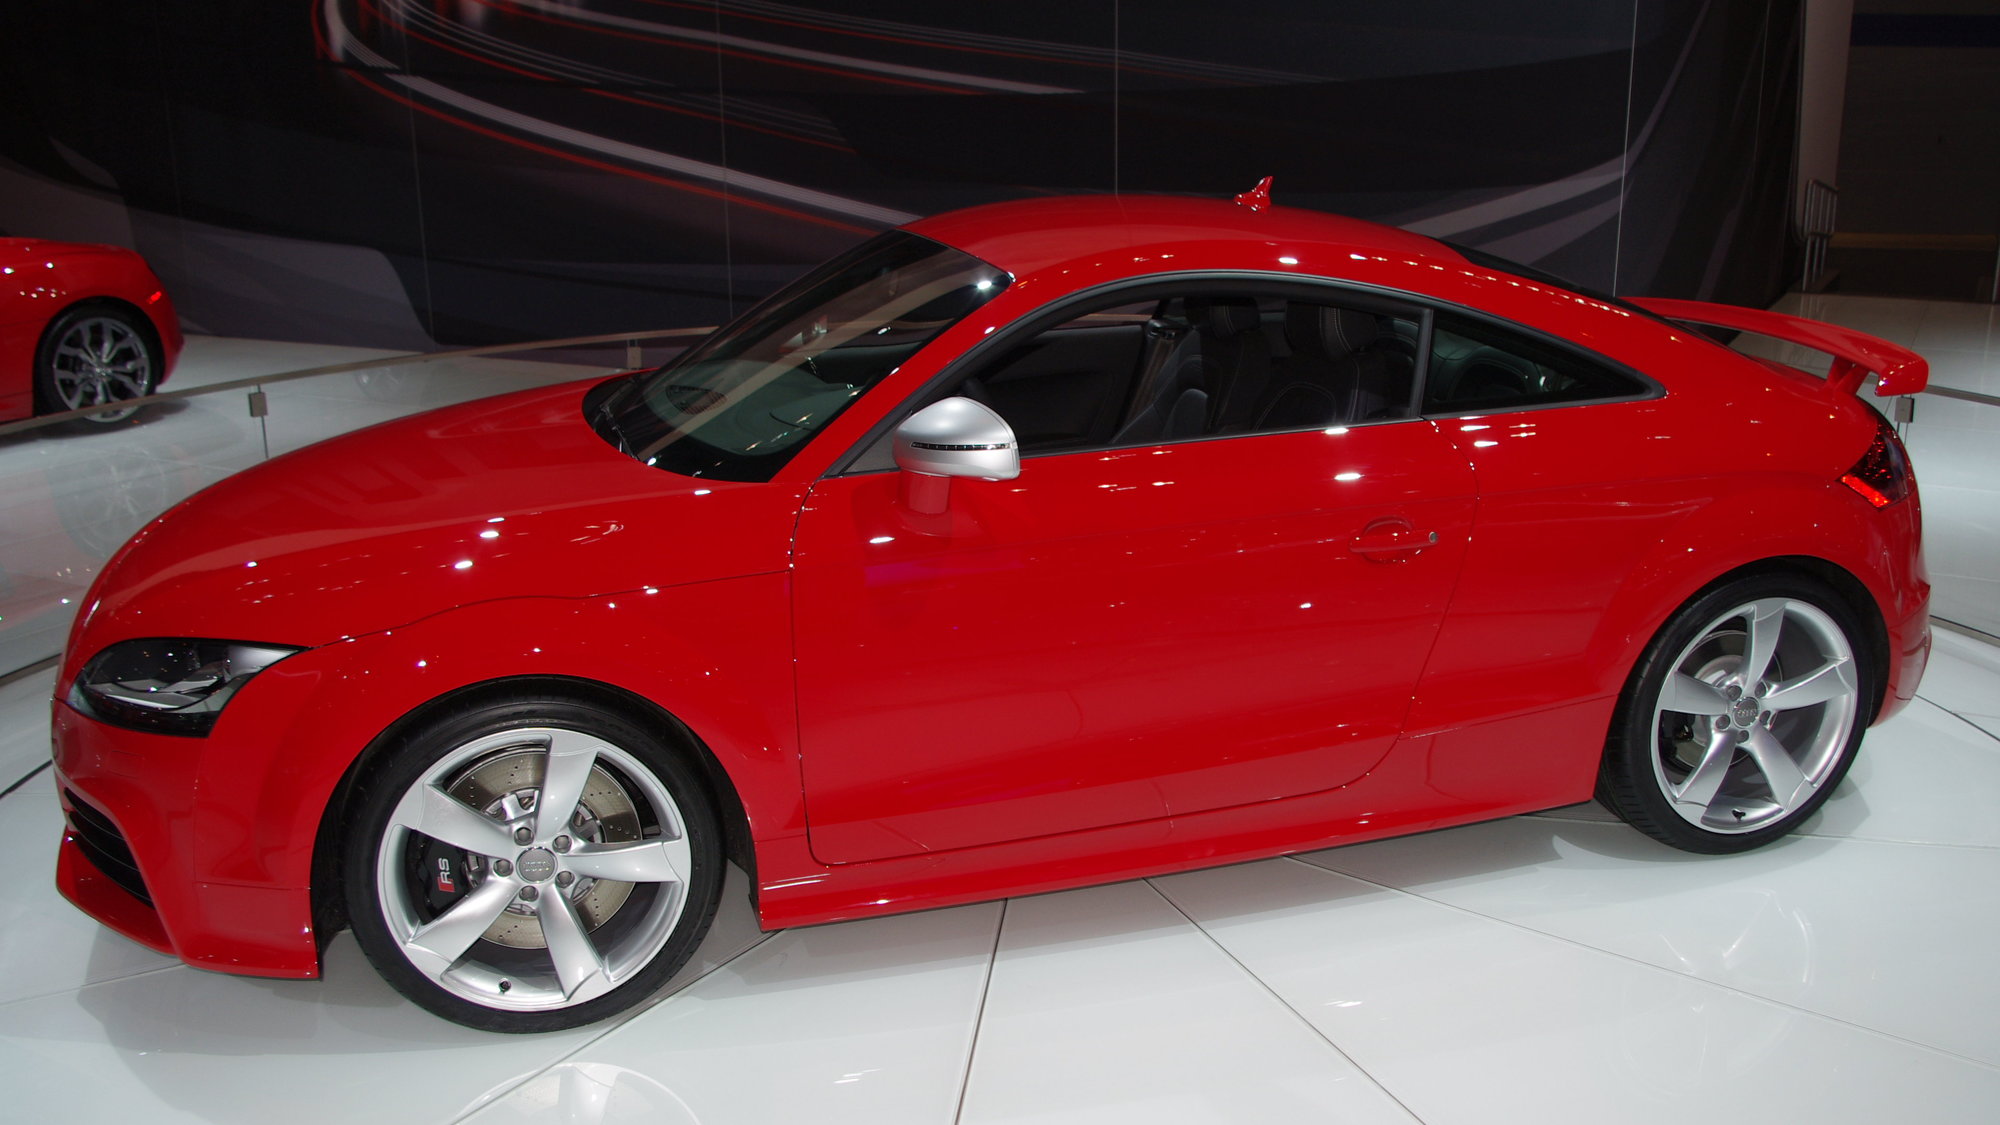 Audi's TT RS at the Chicago Auto Show